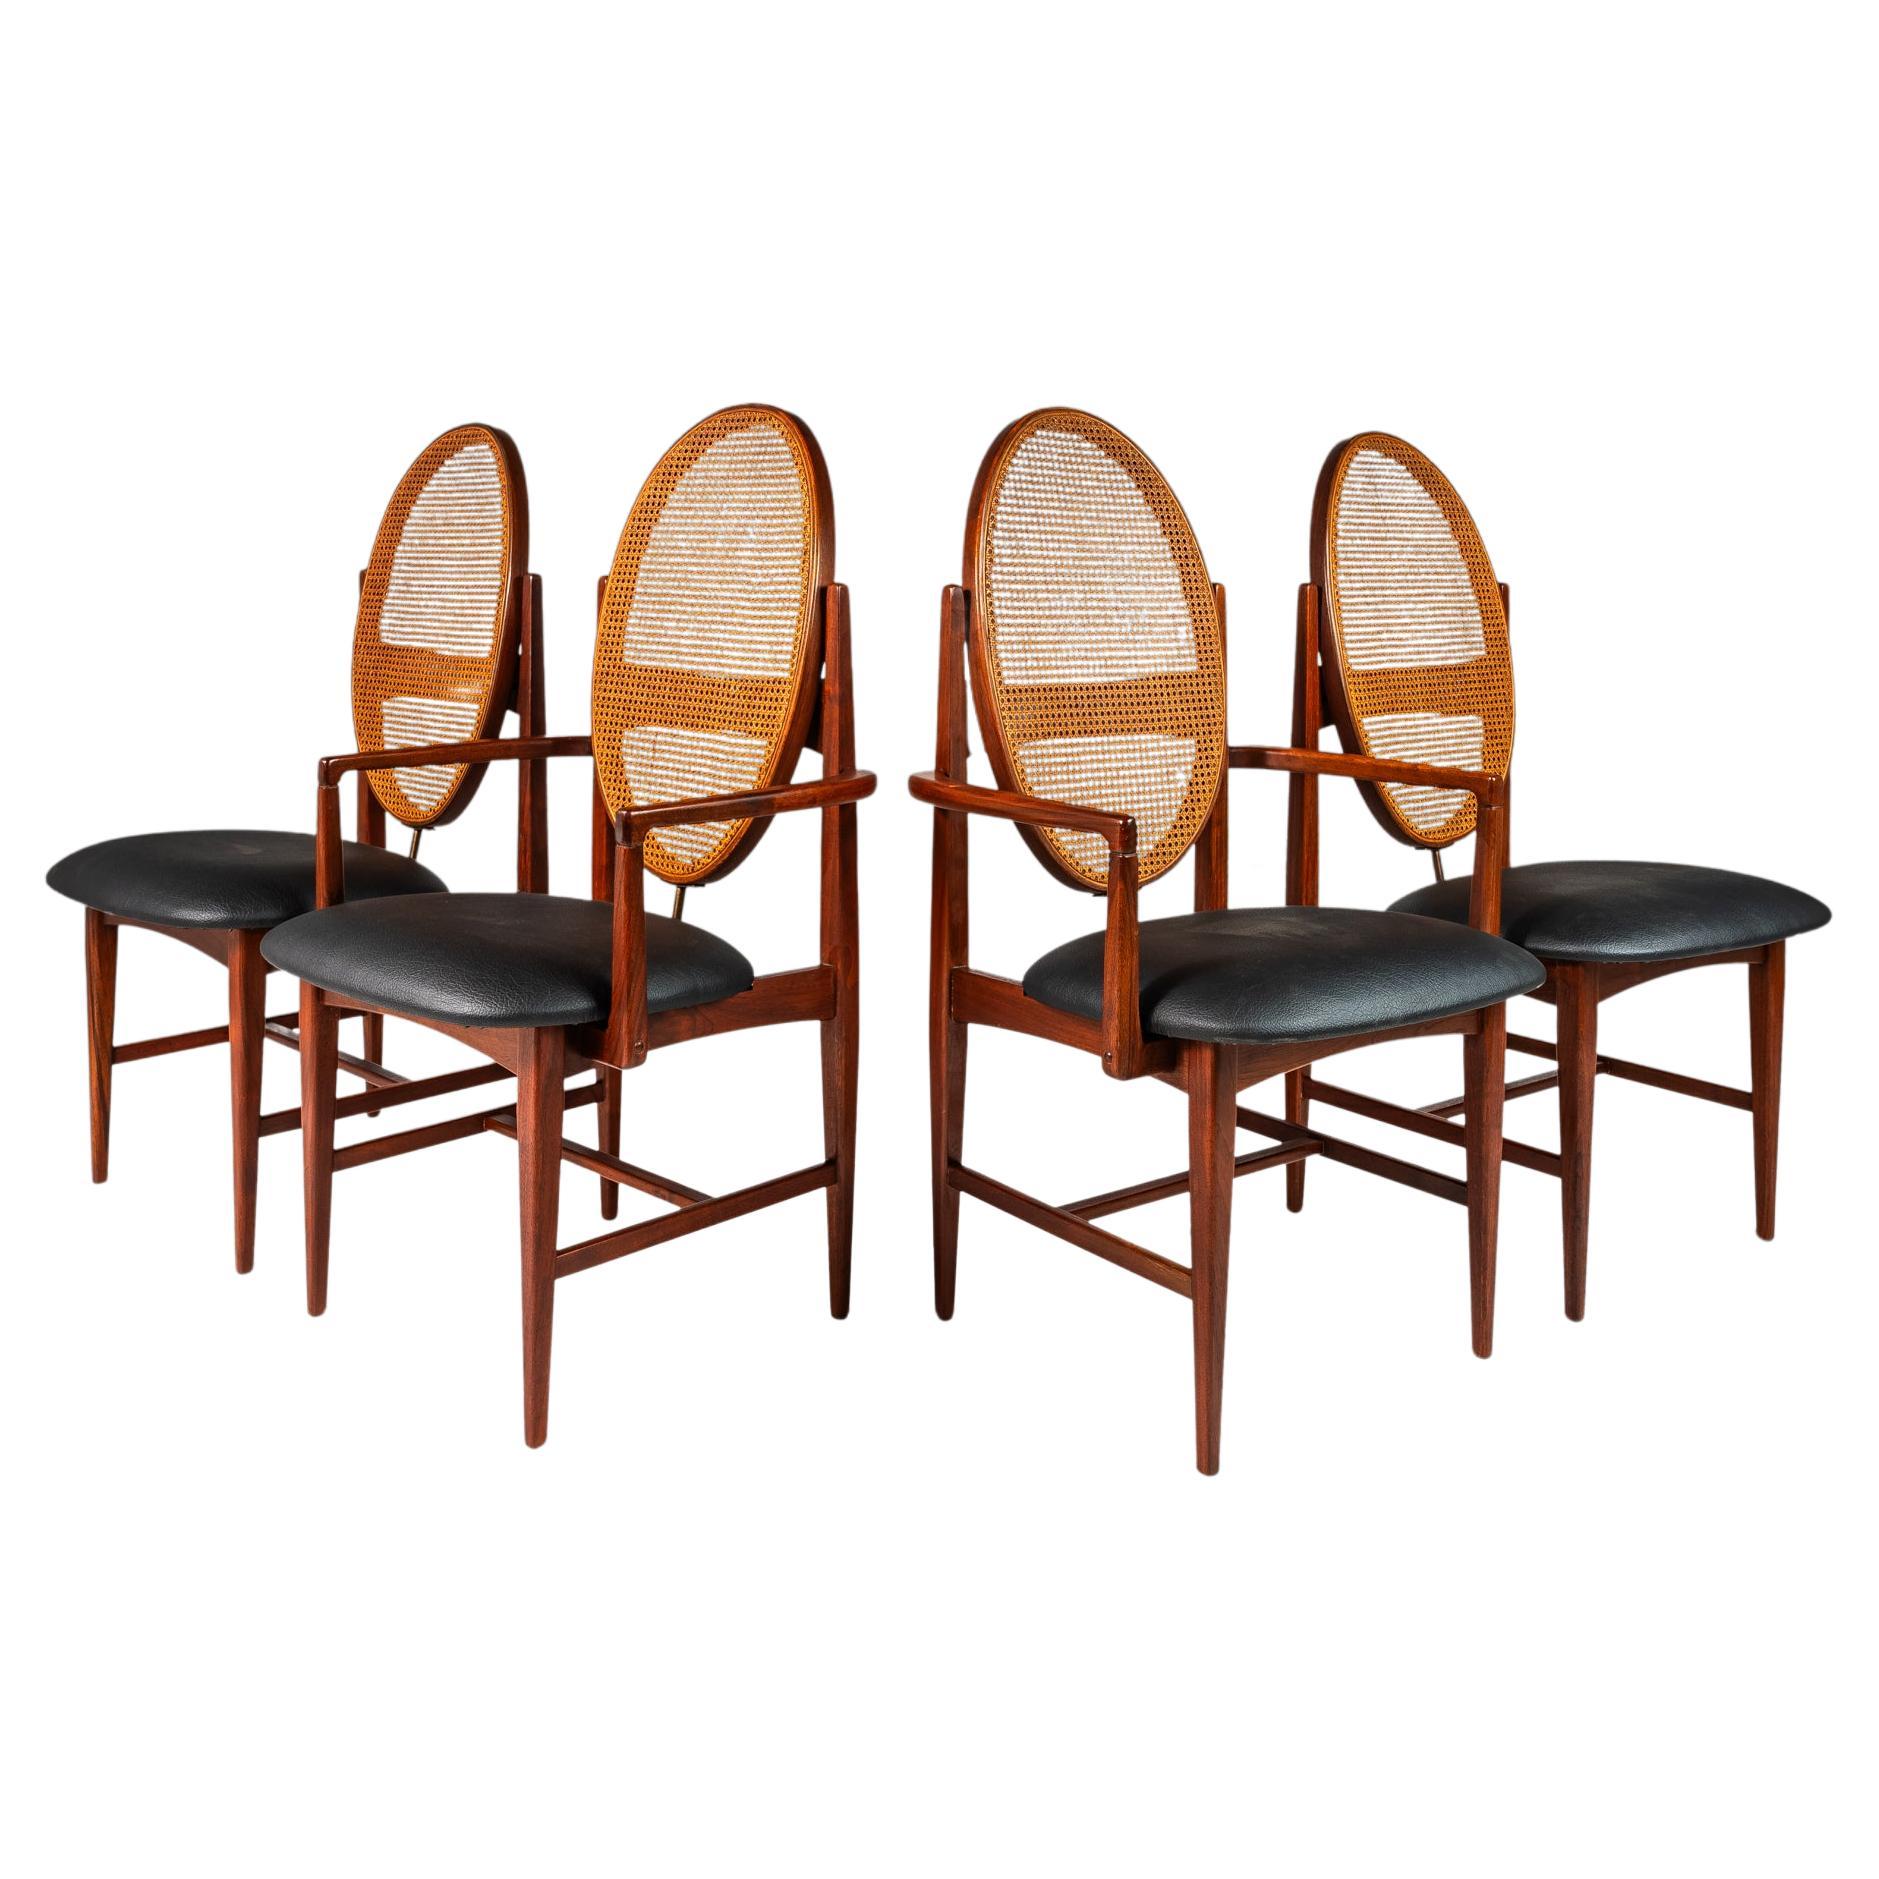 Set of 4 Dining Chairs in Walnut, Milo Baughman for Directional Furniture, 1960s